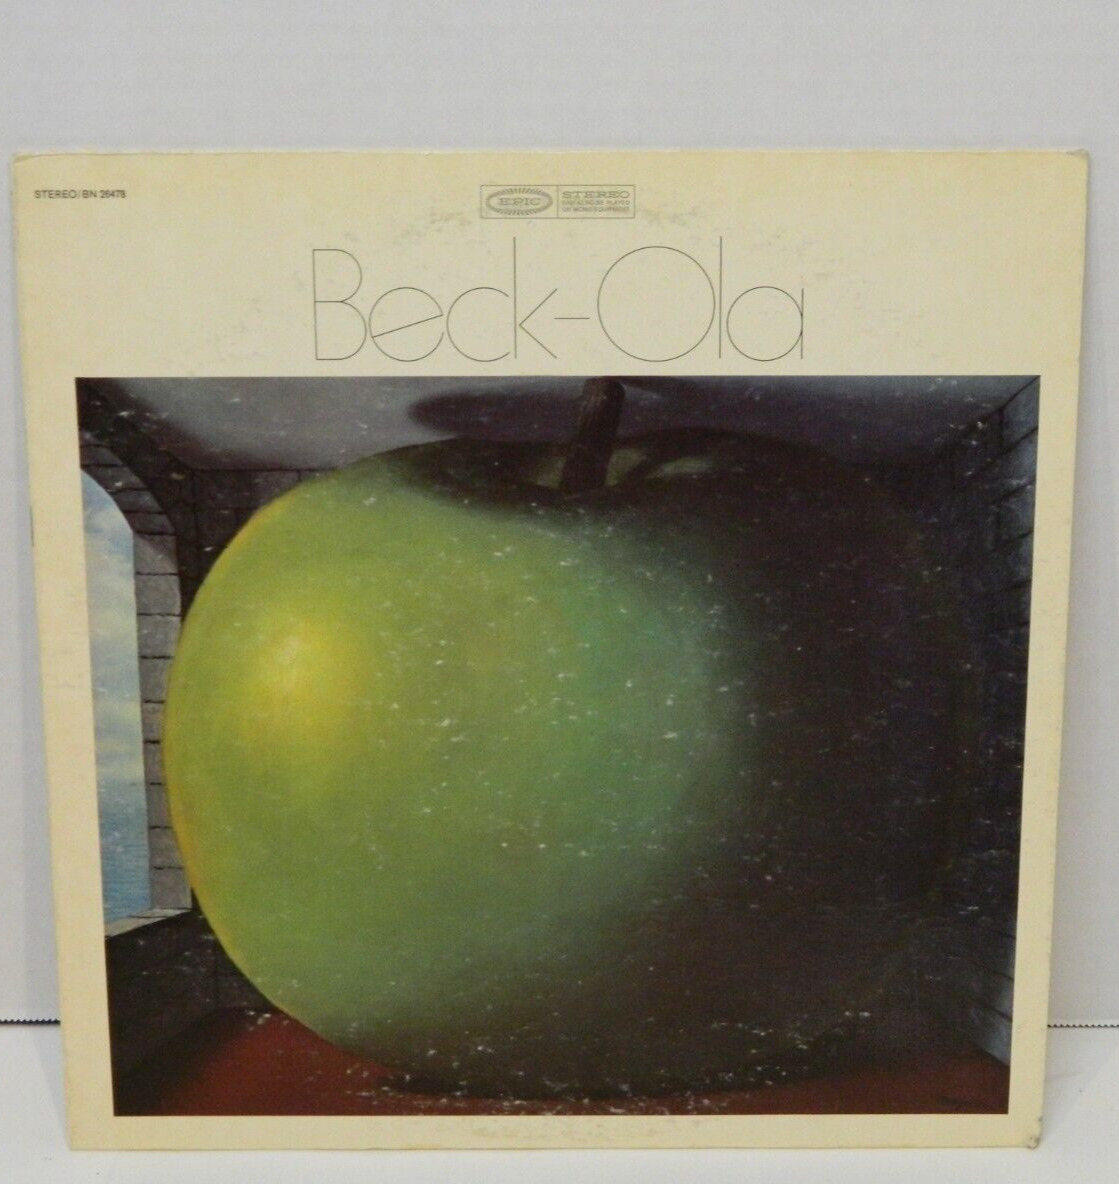 The Jeff Beck Group ‎– Beck-Ola - 1969 Epic ‎– BN 26478 Stereo LP